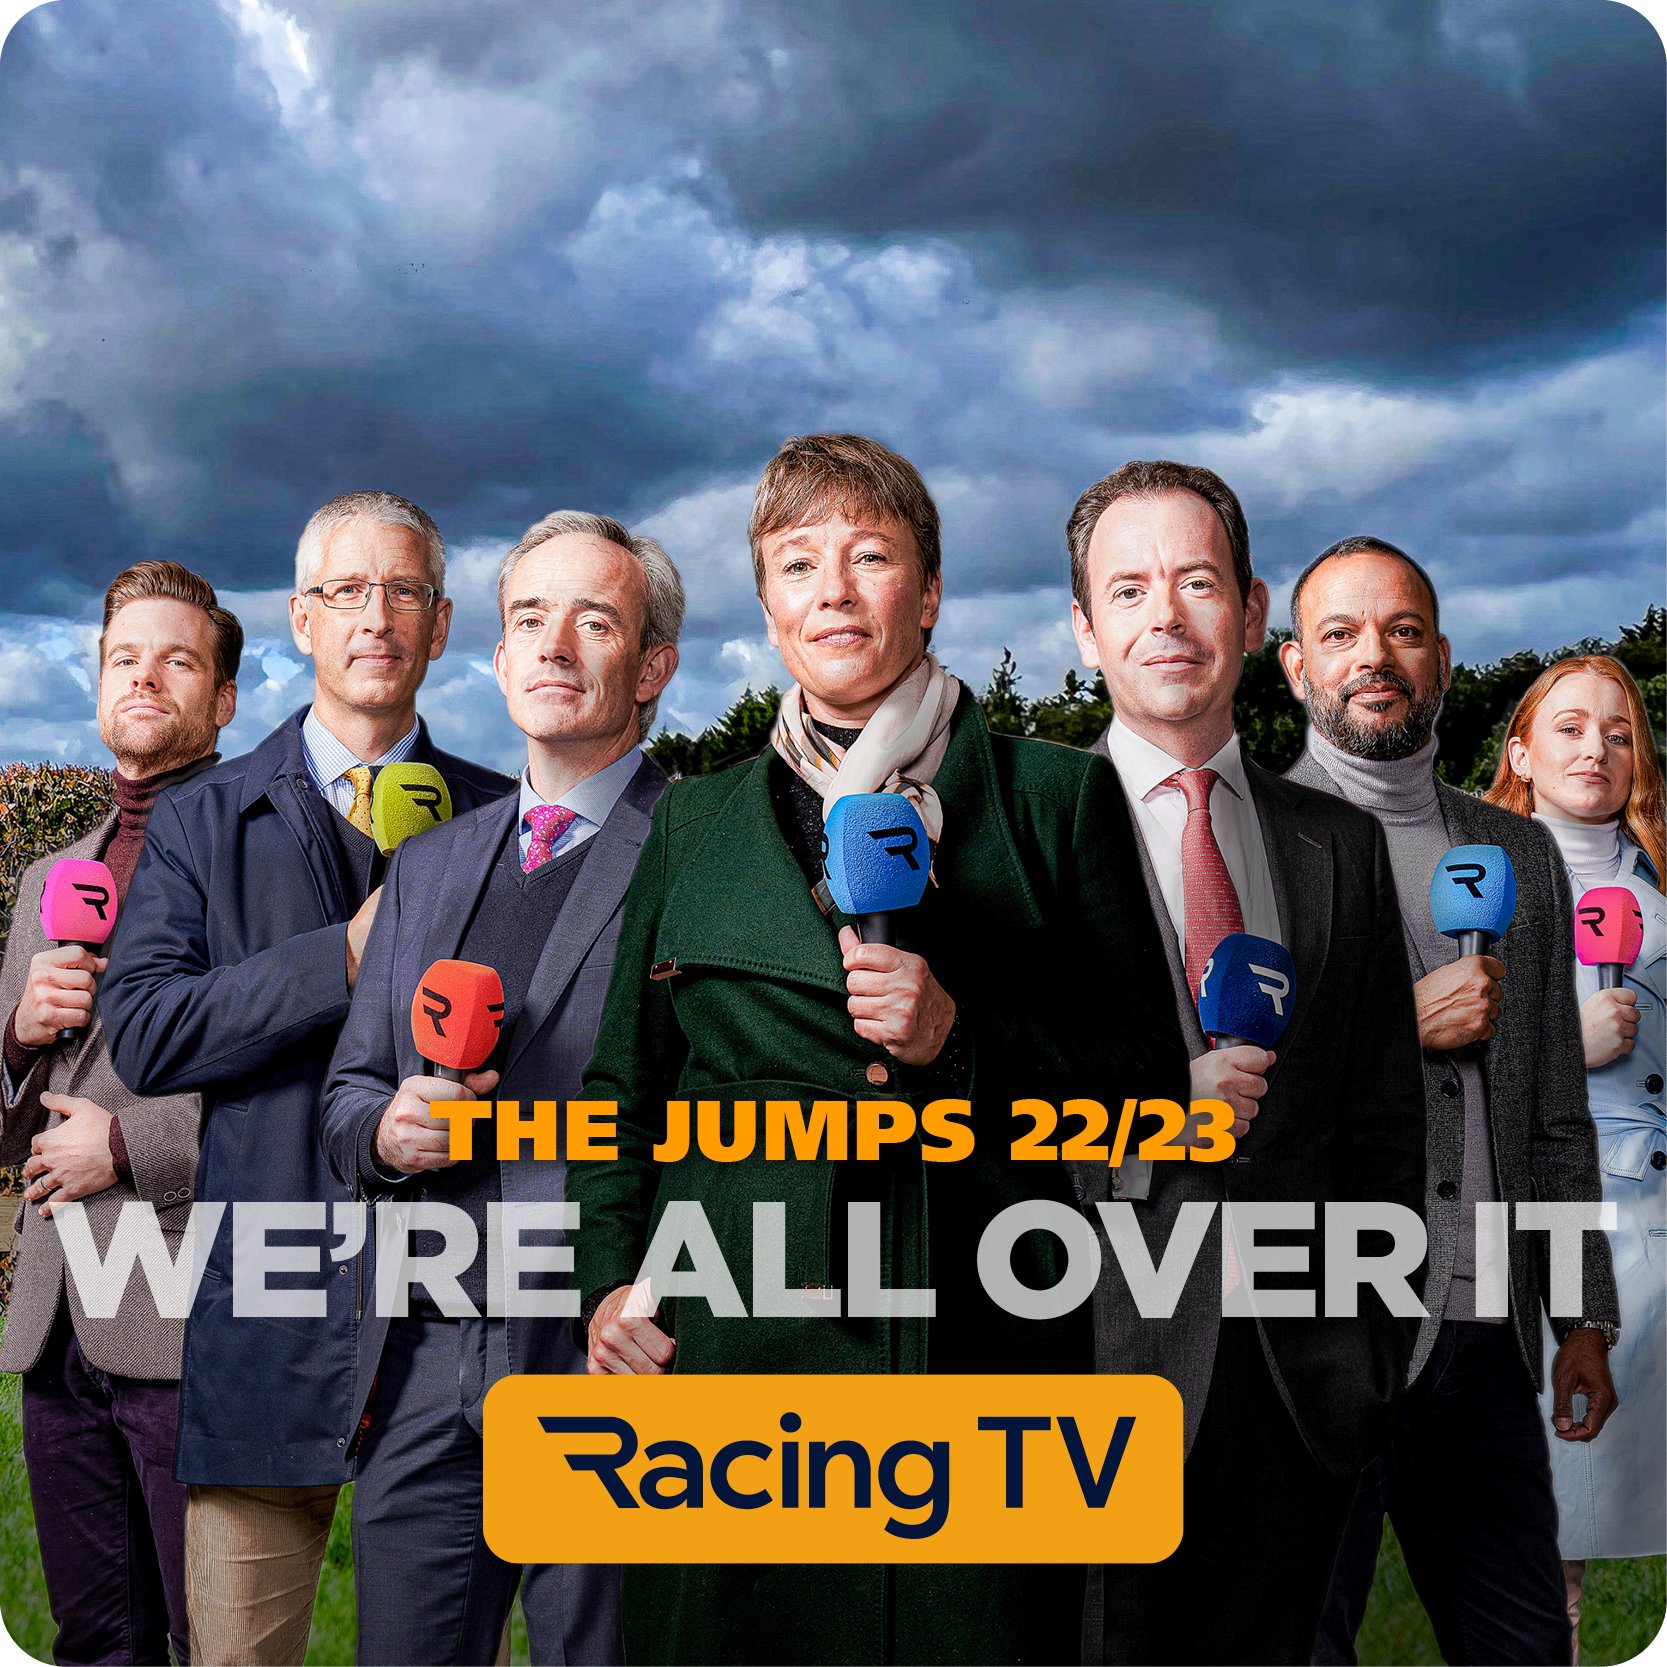 Racing TV_Were_all_over_it_campaign